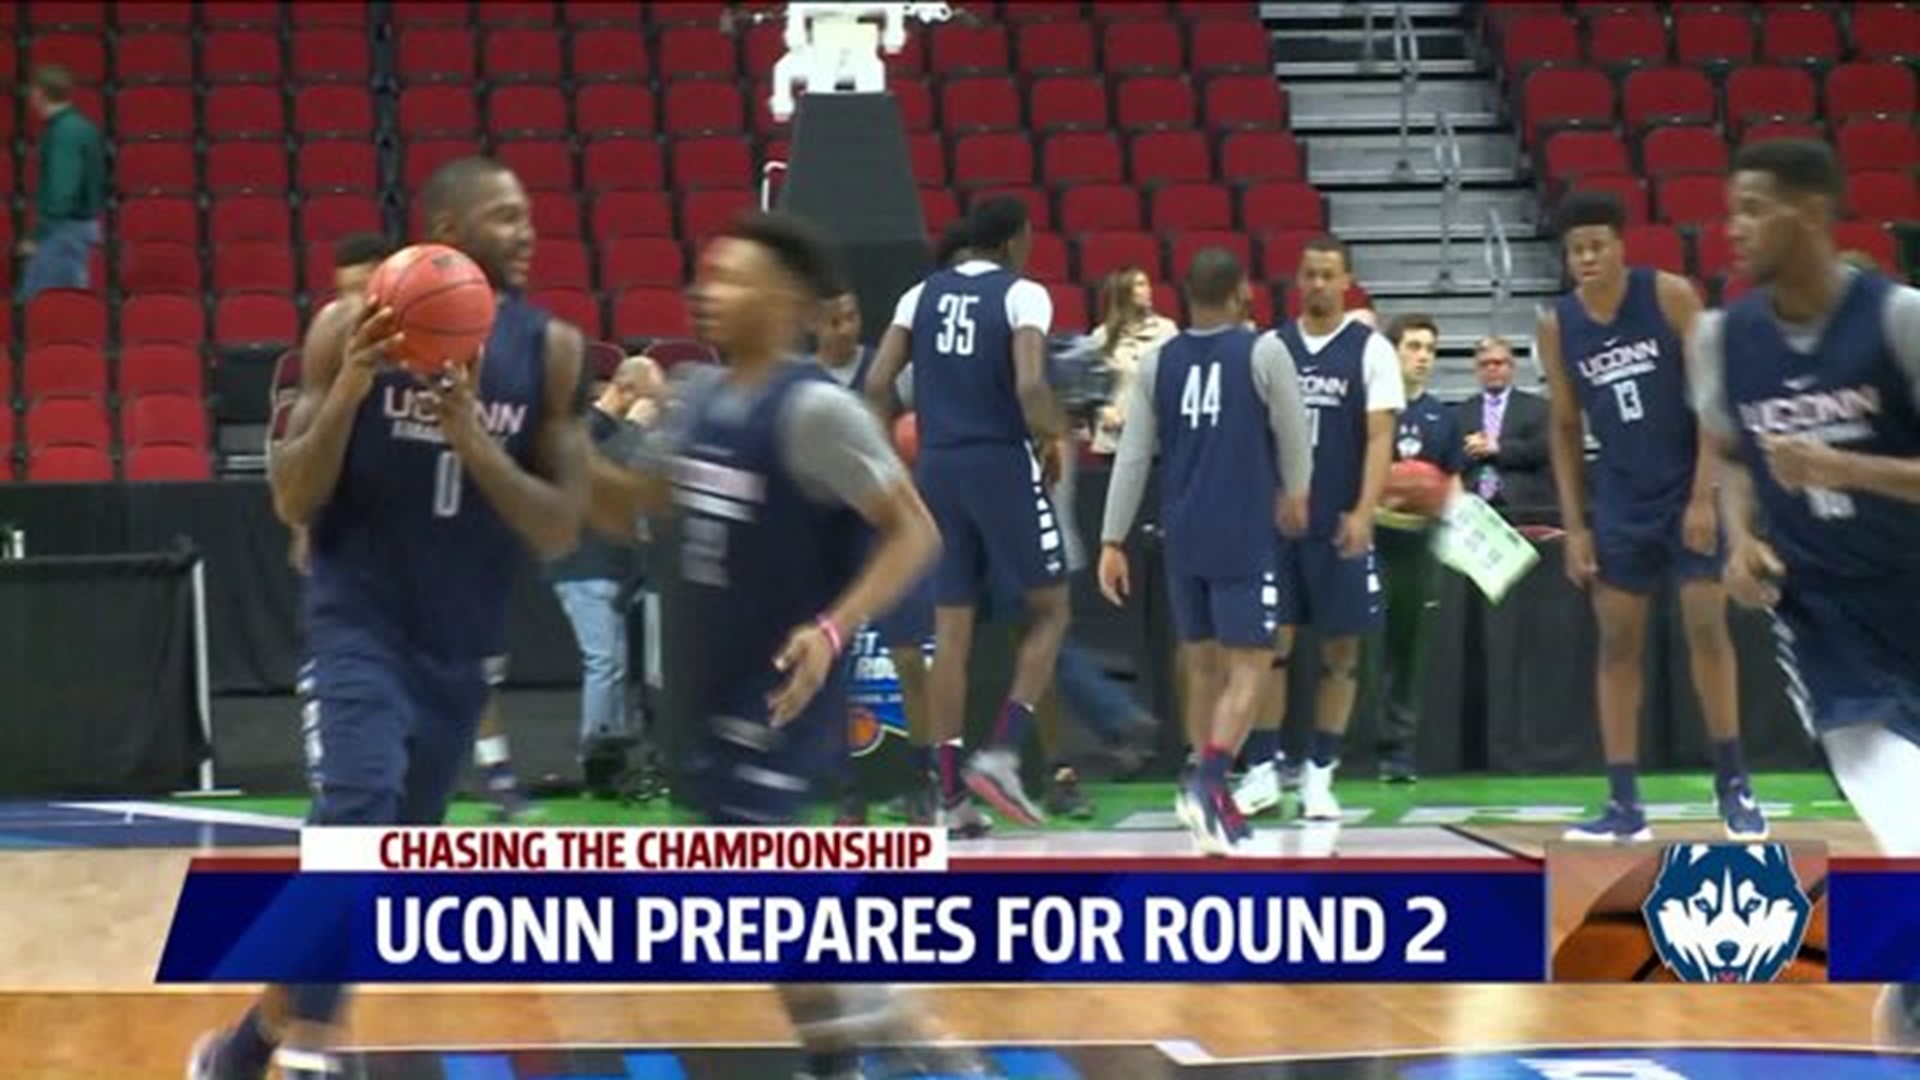 UConn continues championship chase